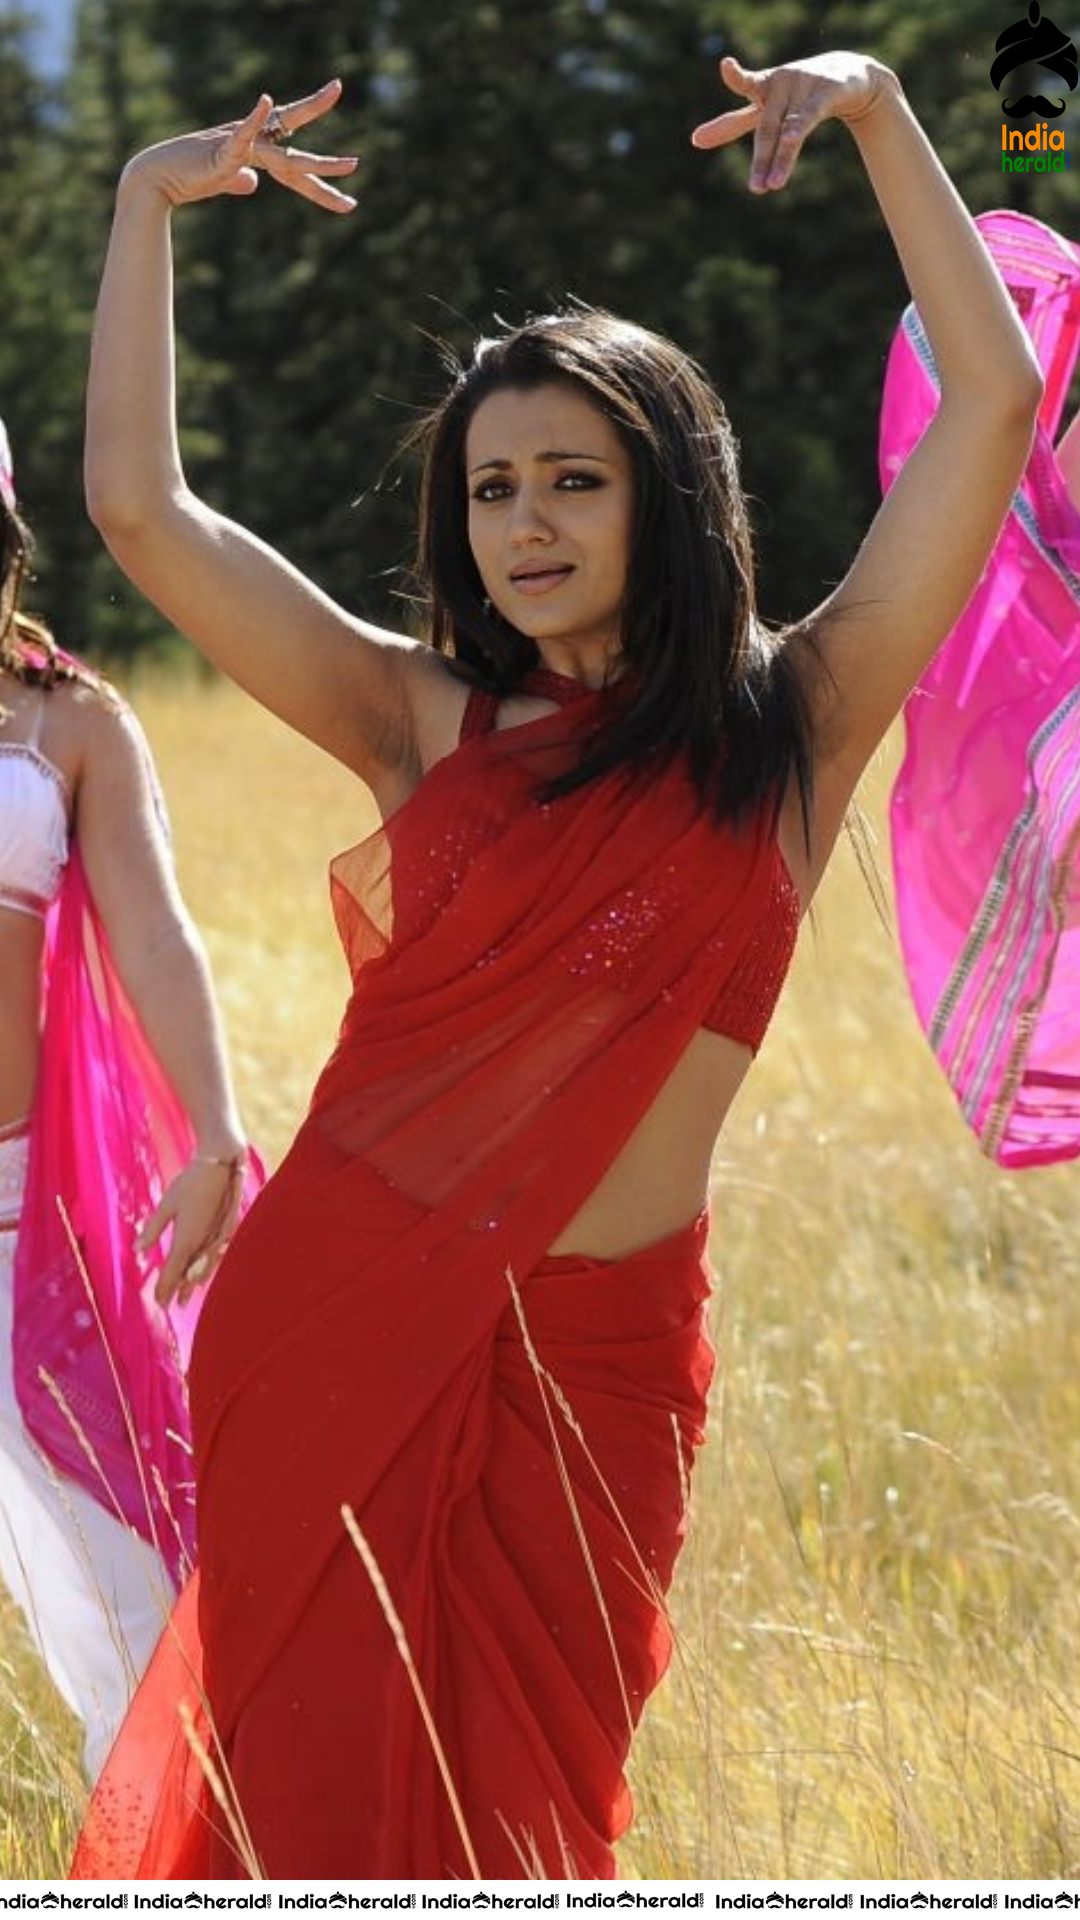 Trisha Red Hot Mood Erecting Photos where she exposes her tempting waist and navel Set 1